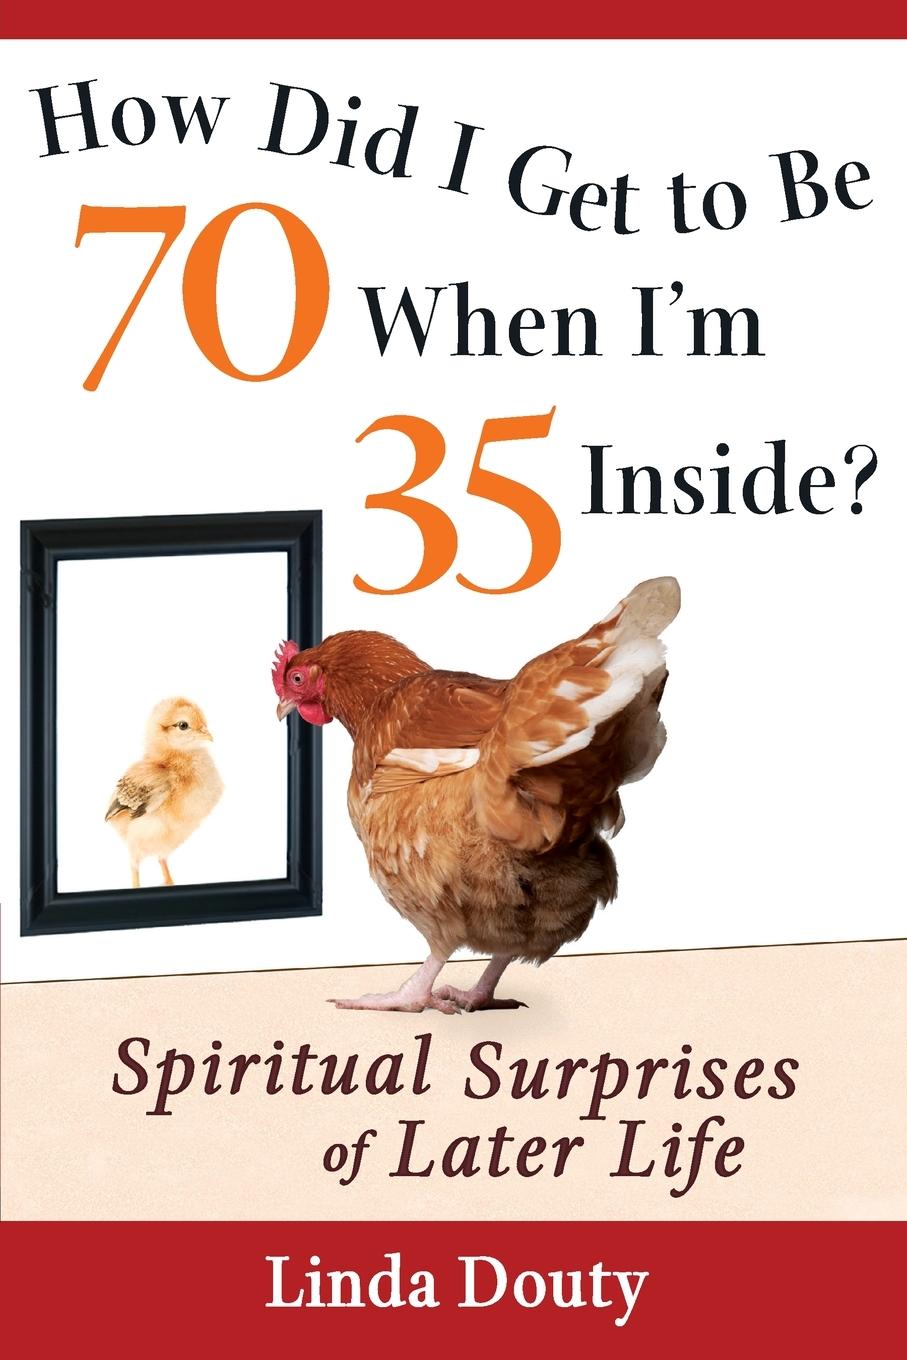 How Did I Get to Be 70 When I m 35 Inside?: Spiritual Surprises of Later Life - Douty, Linda